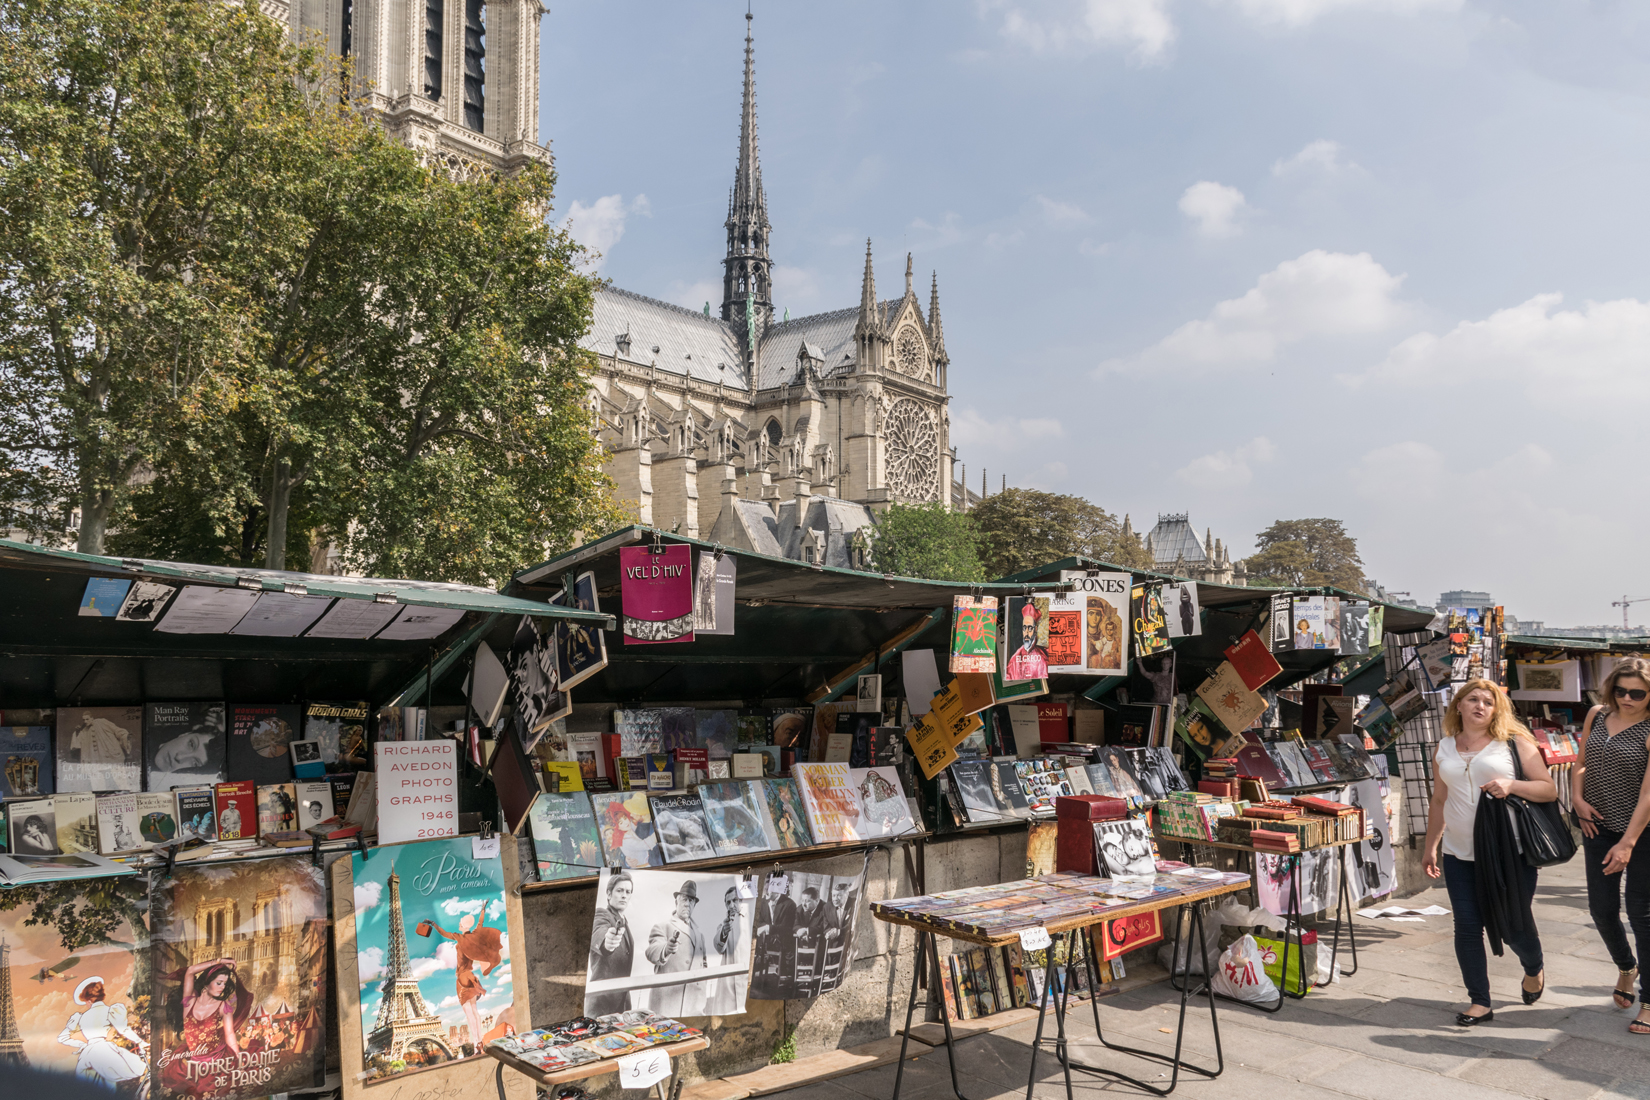 The Bouquinistes, booksellers, of Paris